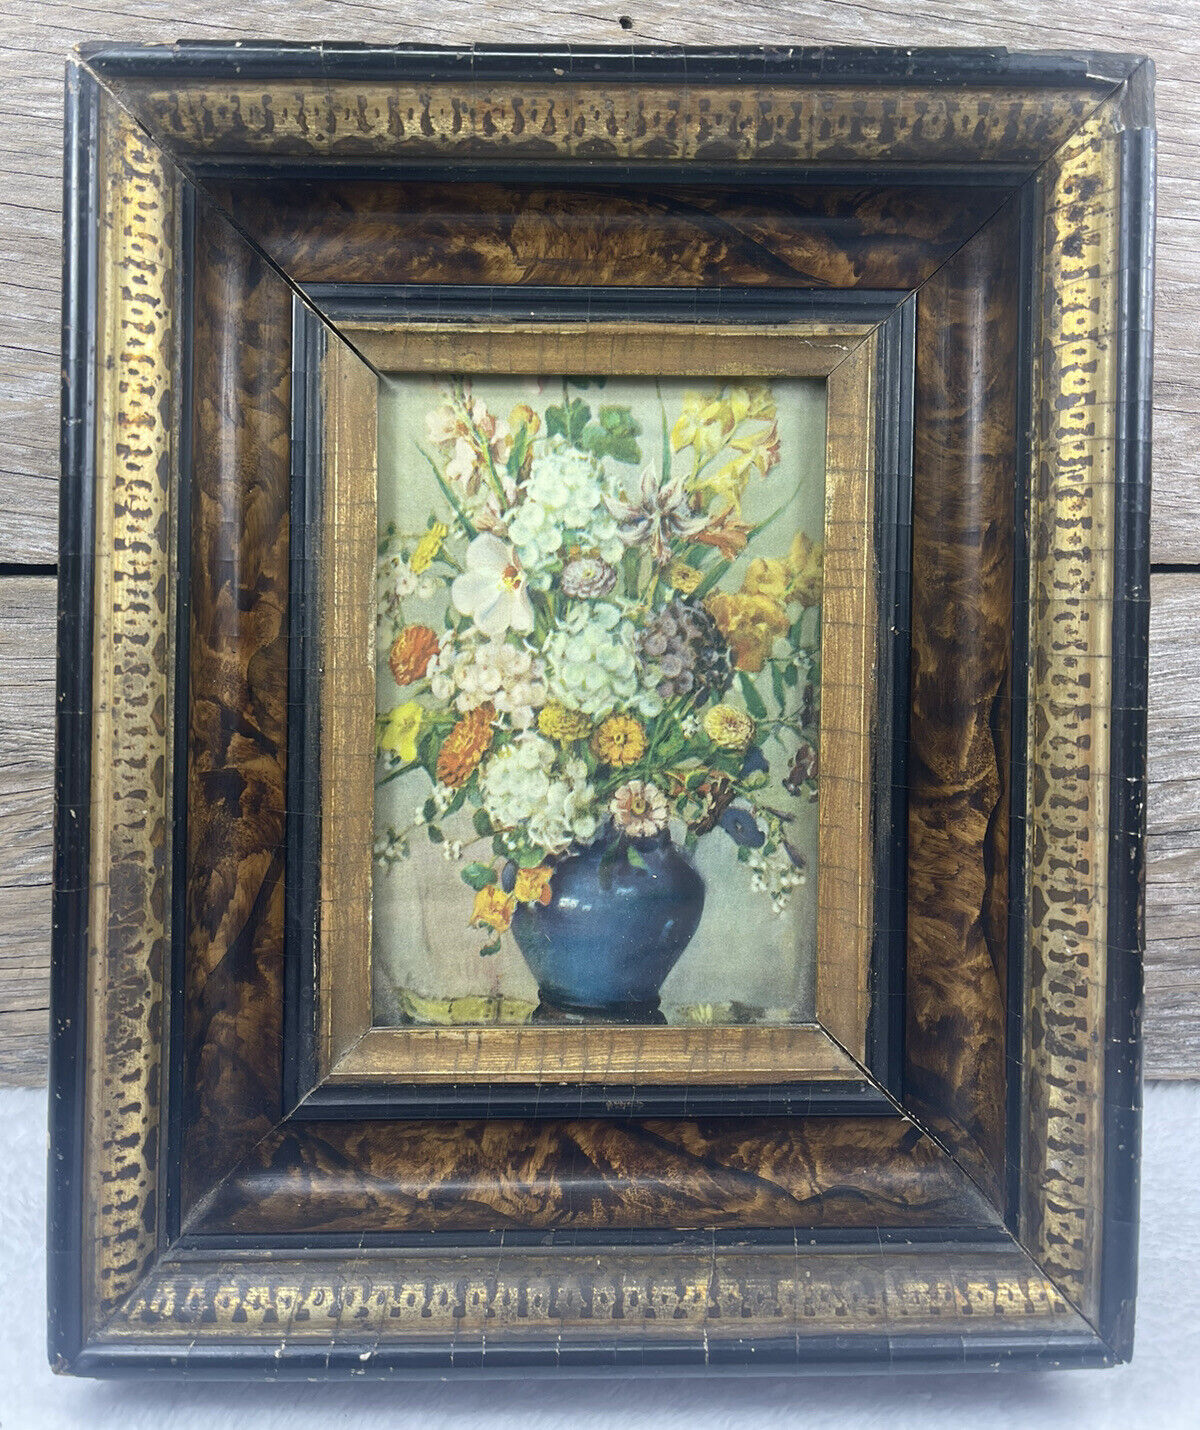 Antique Old Deep Shadow Box Framed Floral Picture 9”x10.75” VTG Has Glass Blue